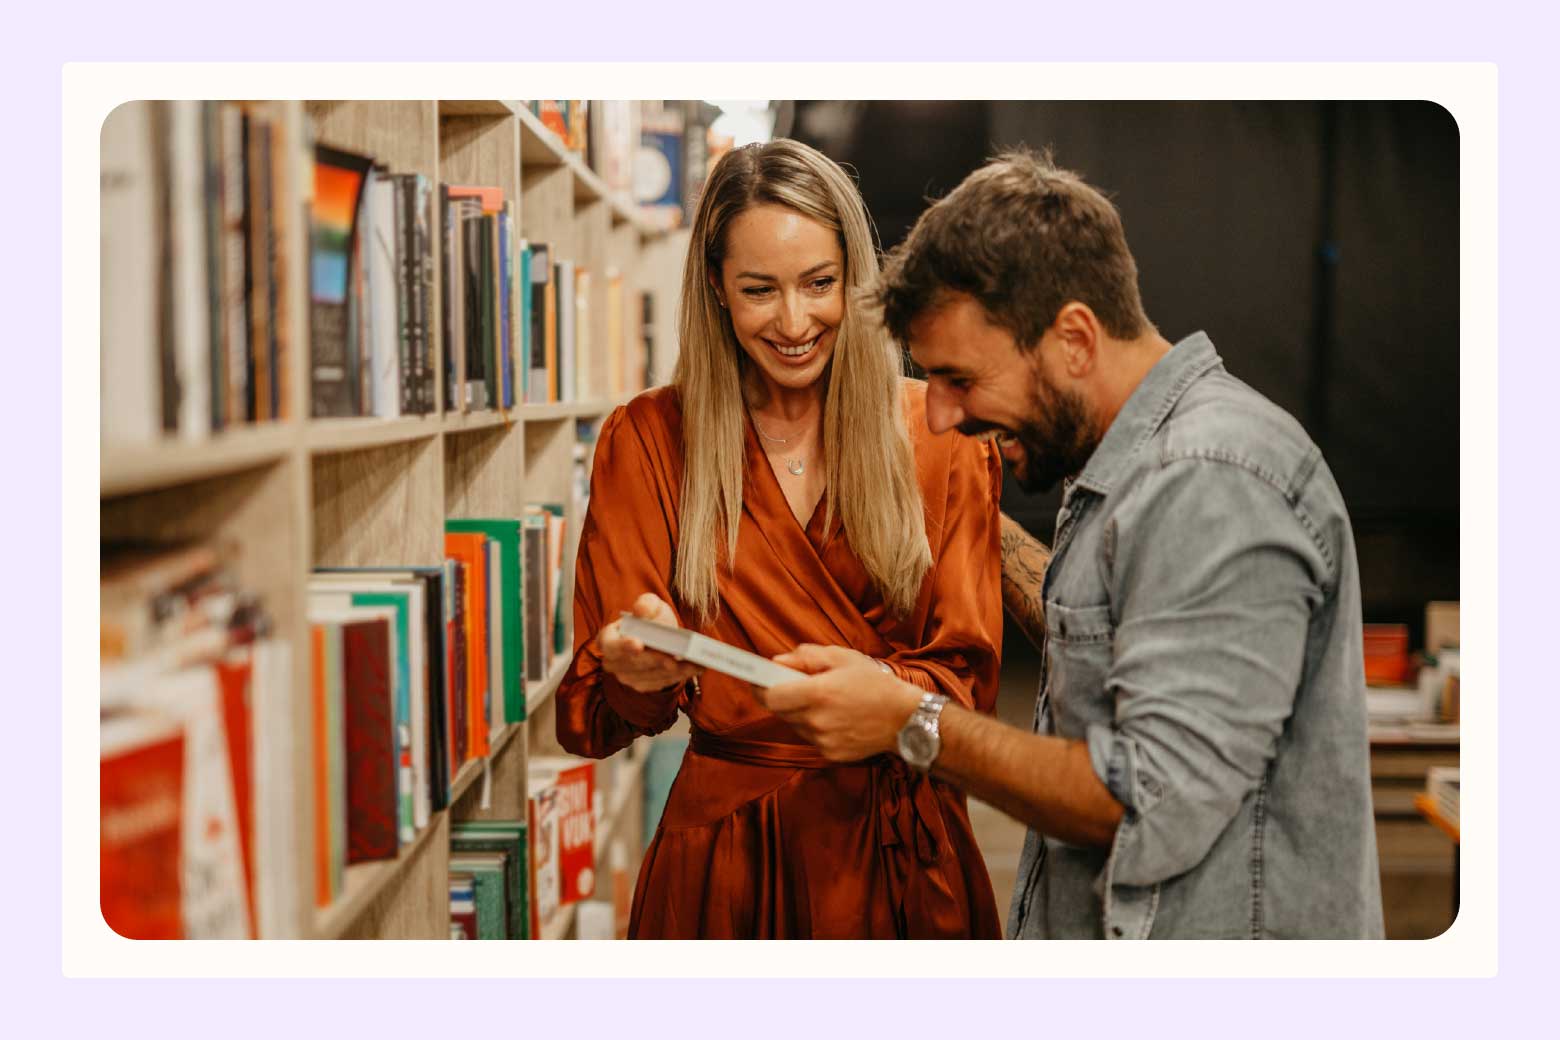 Couple laughs as woman shows her fiance a book while they're in a library